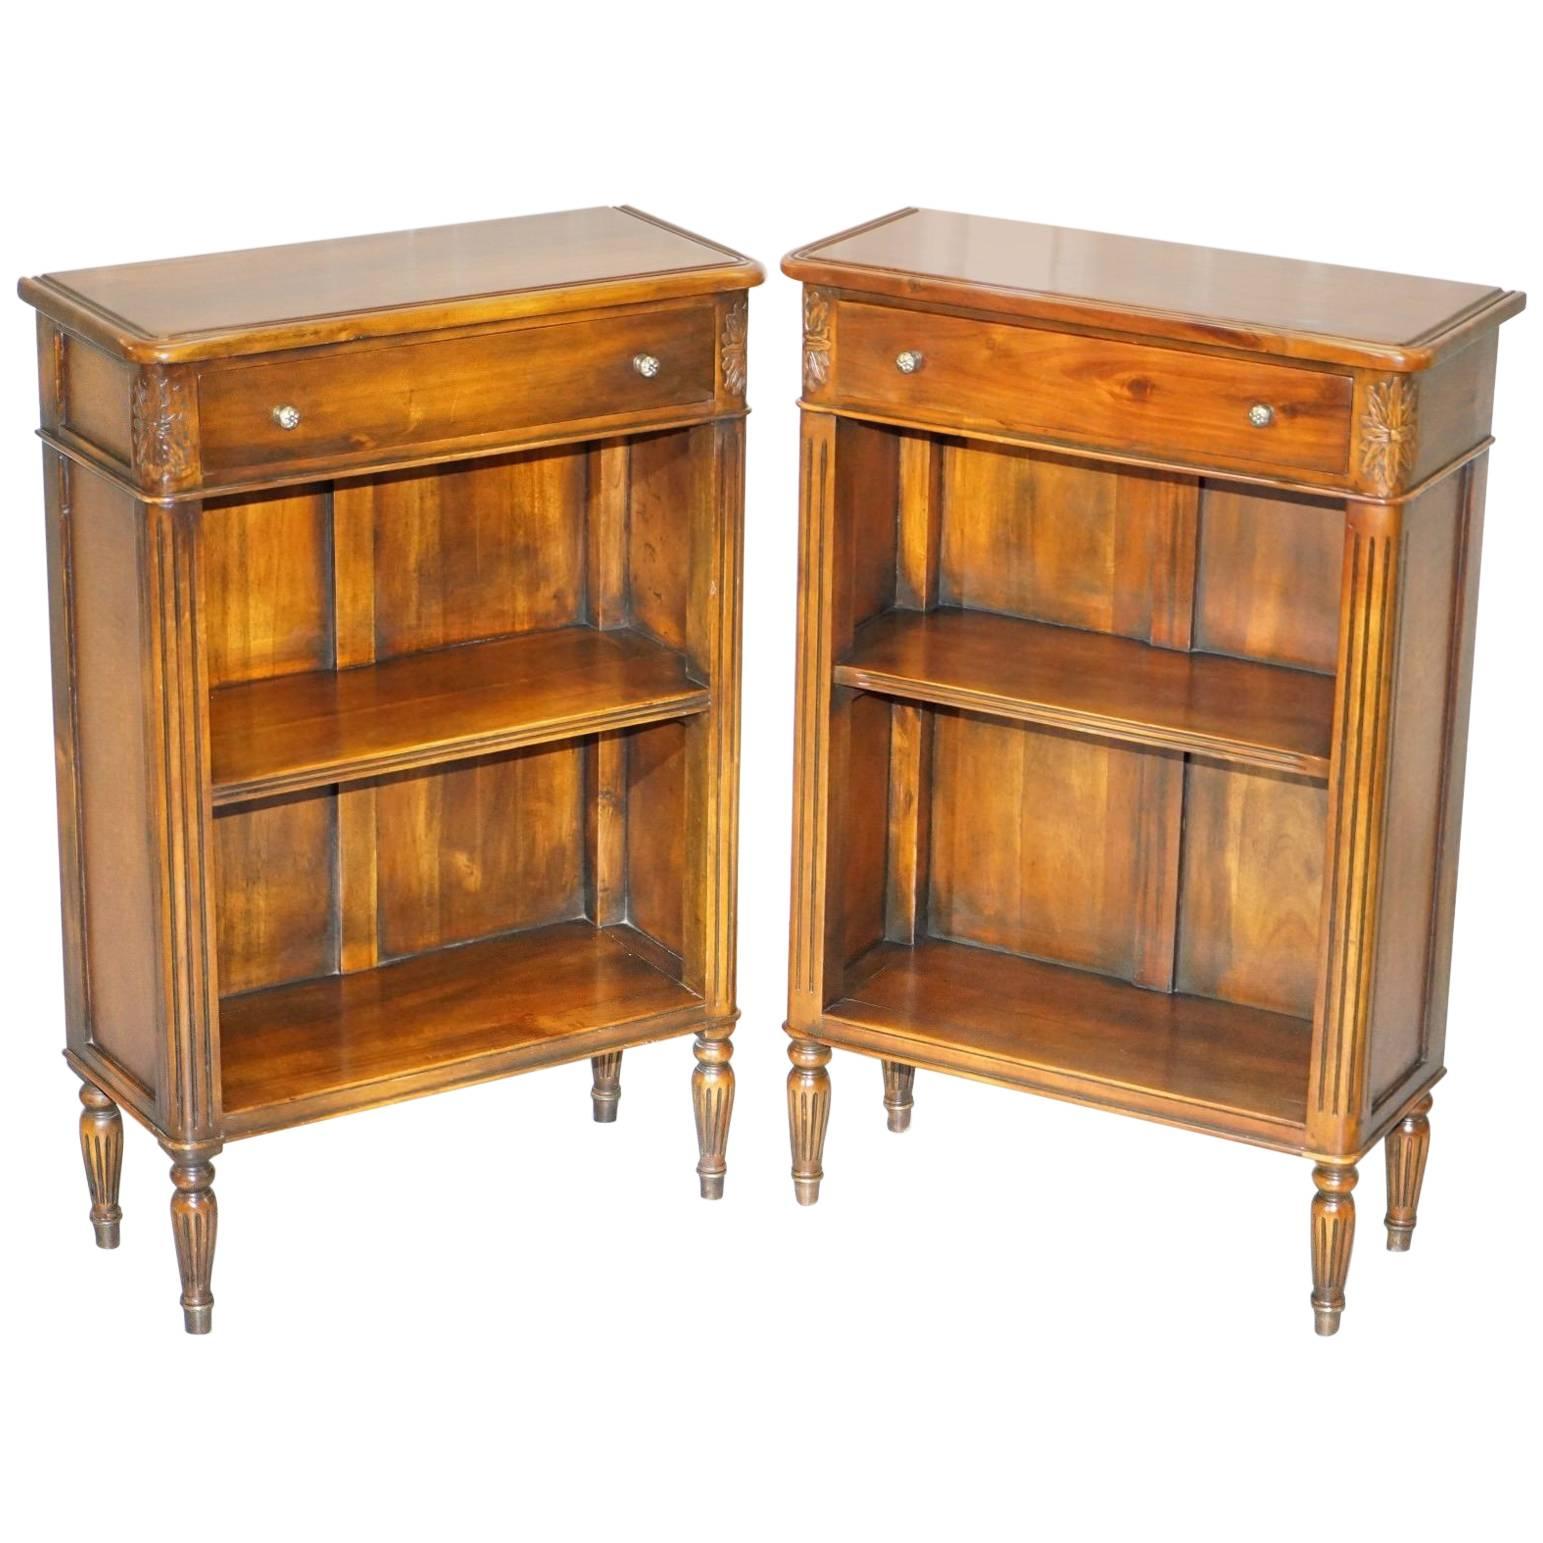 Matching Pair of Theodore Alexander Republic Low Bookcases with Single Drawer